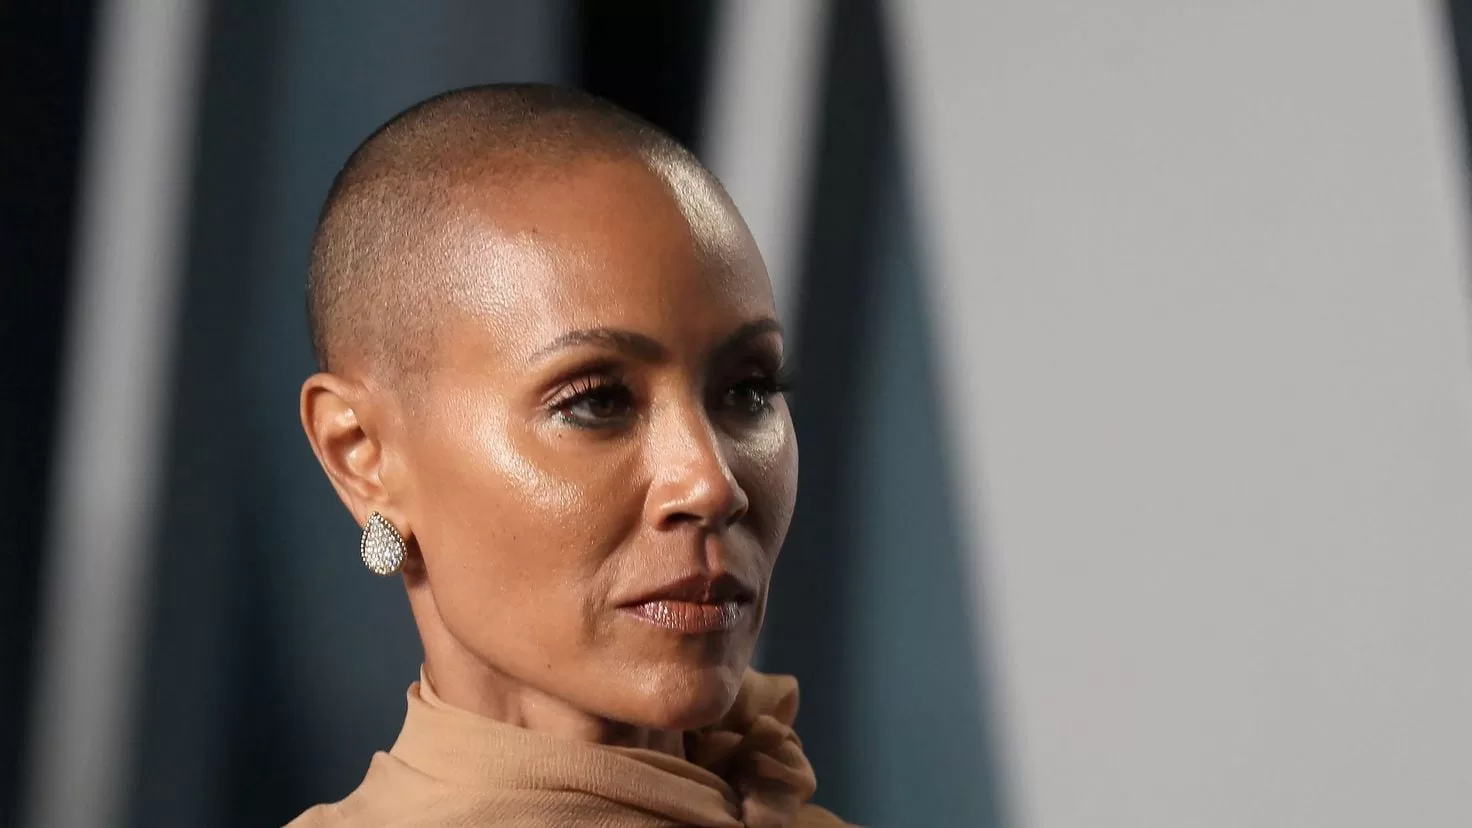 They try to rob Jada Pinkett's house in Los Angeles
